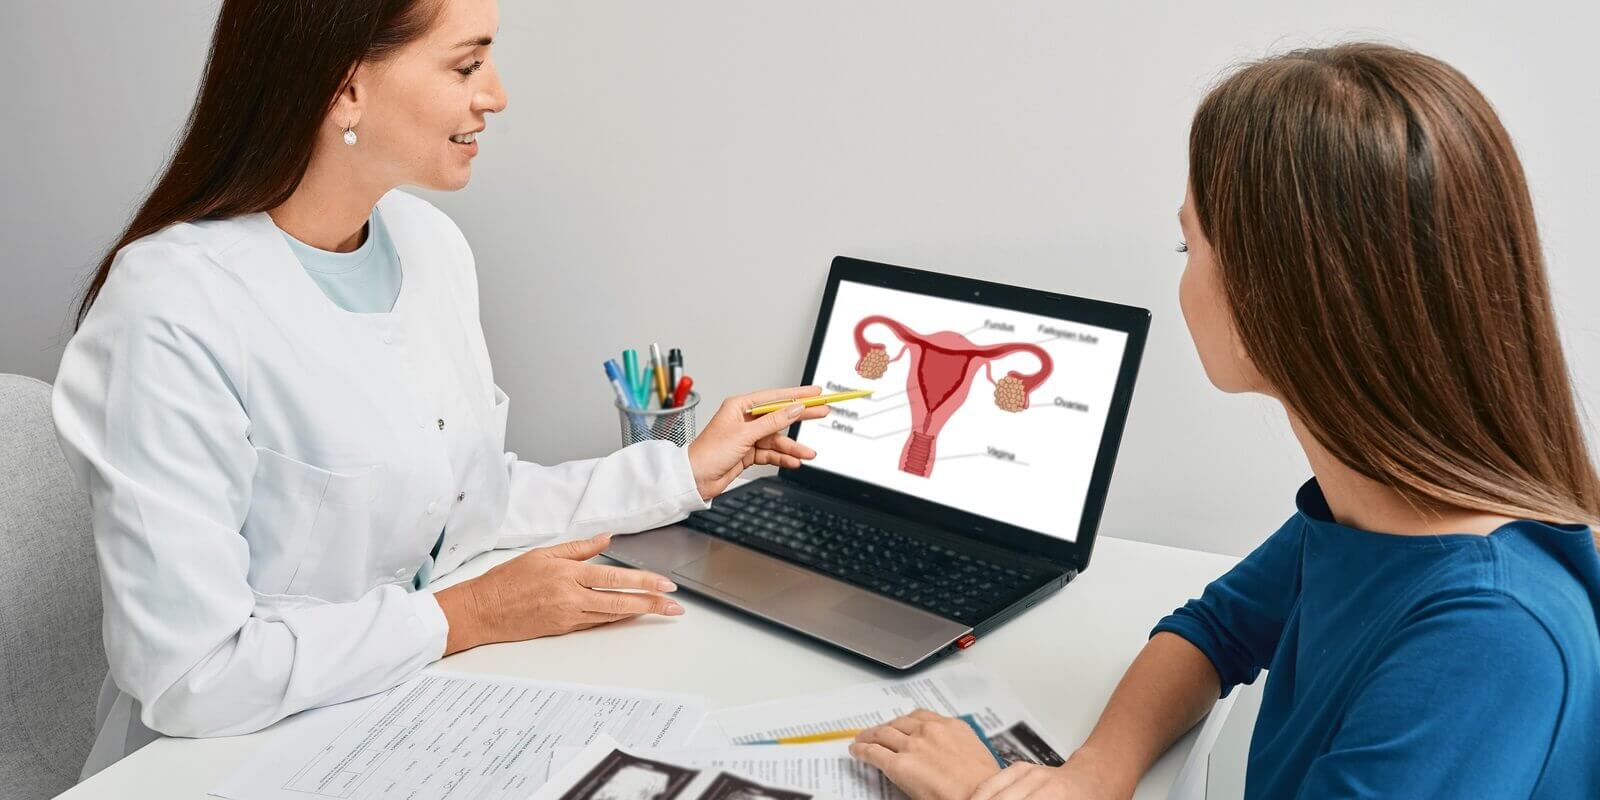 gynecologist consultation for young woman patient